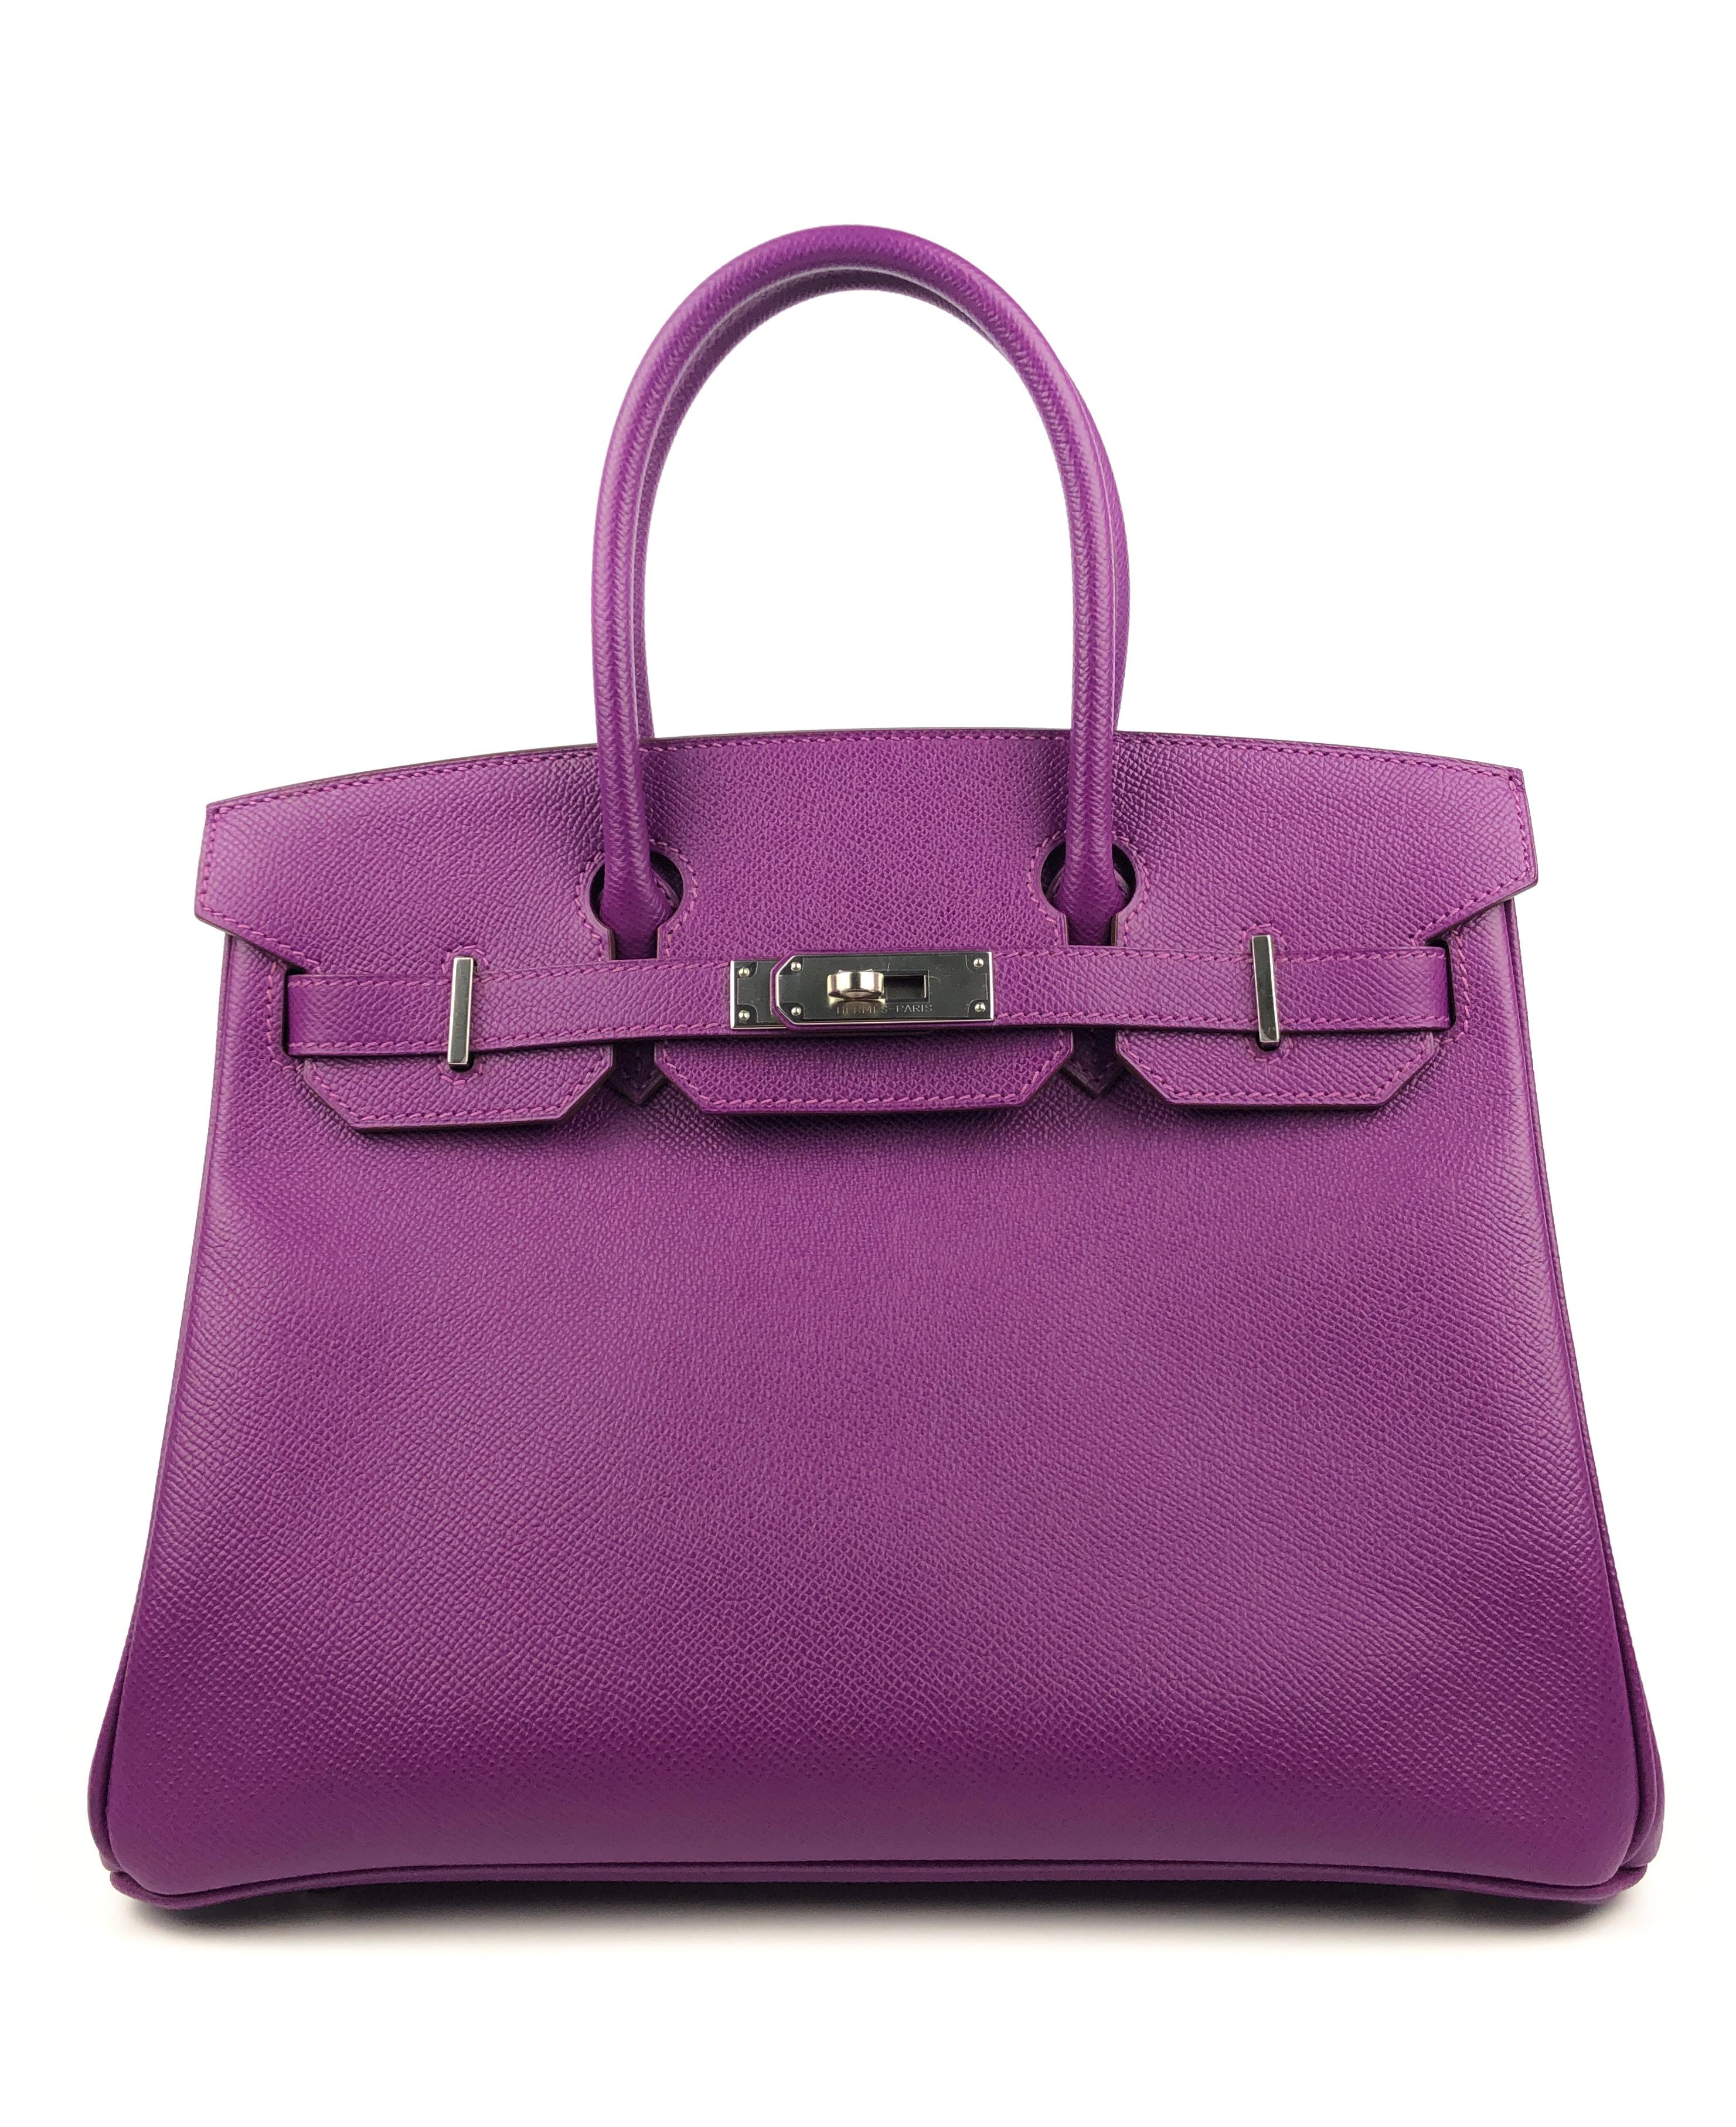 Stunning Hermes Birkin 30 Anemone Purple Epsom Palladium Hardware.  Like New Plastic on Hardware and Feet. Perfect corners and Structure. R Stamp 2014.

Shop with Confidence from Lux Addicts. Authenticity Guaranteed!